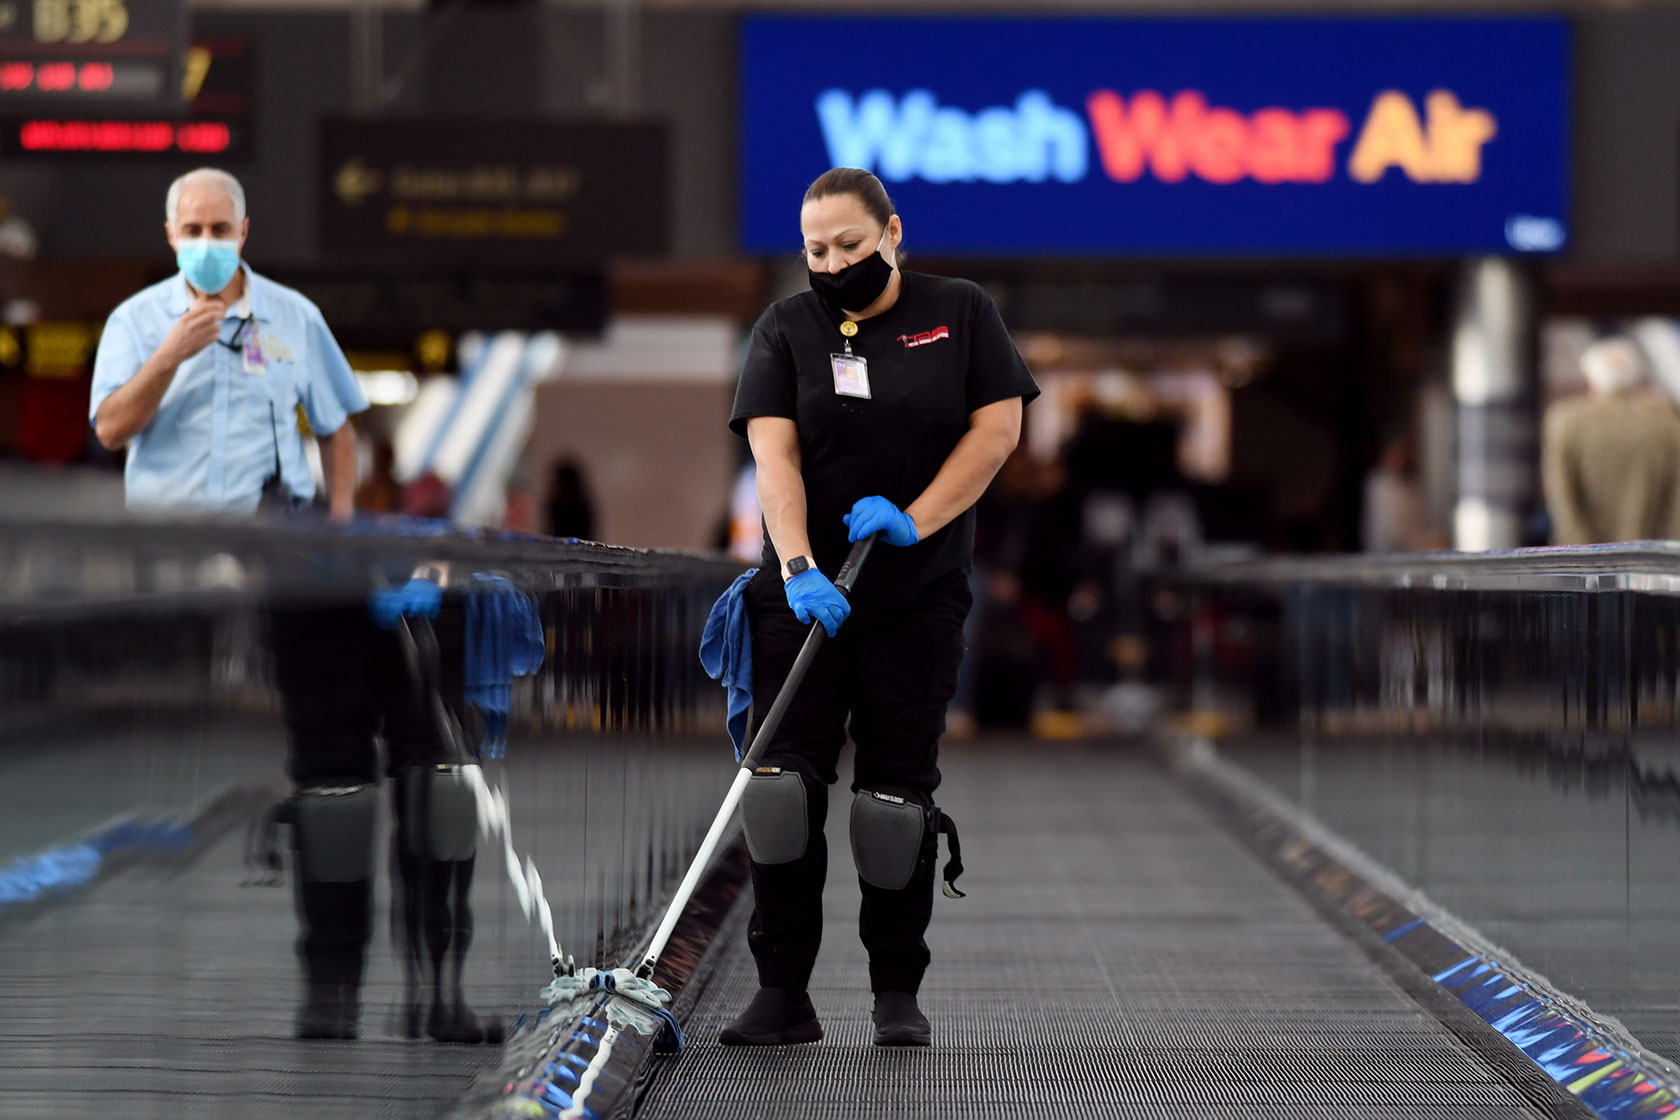 Photo shows a woman cleaning a moving walkway in an airport concourse.